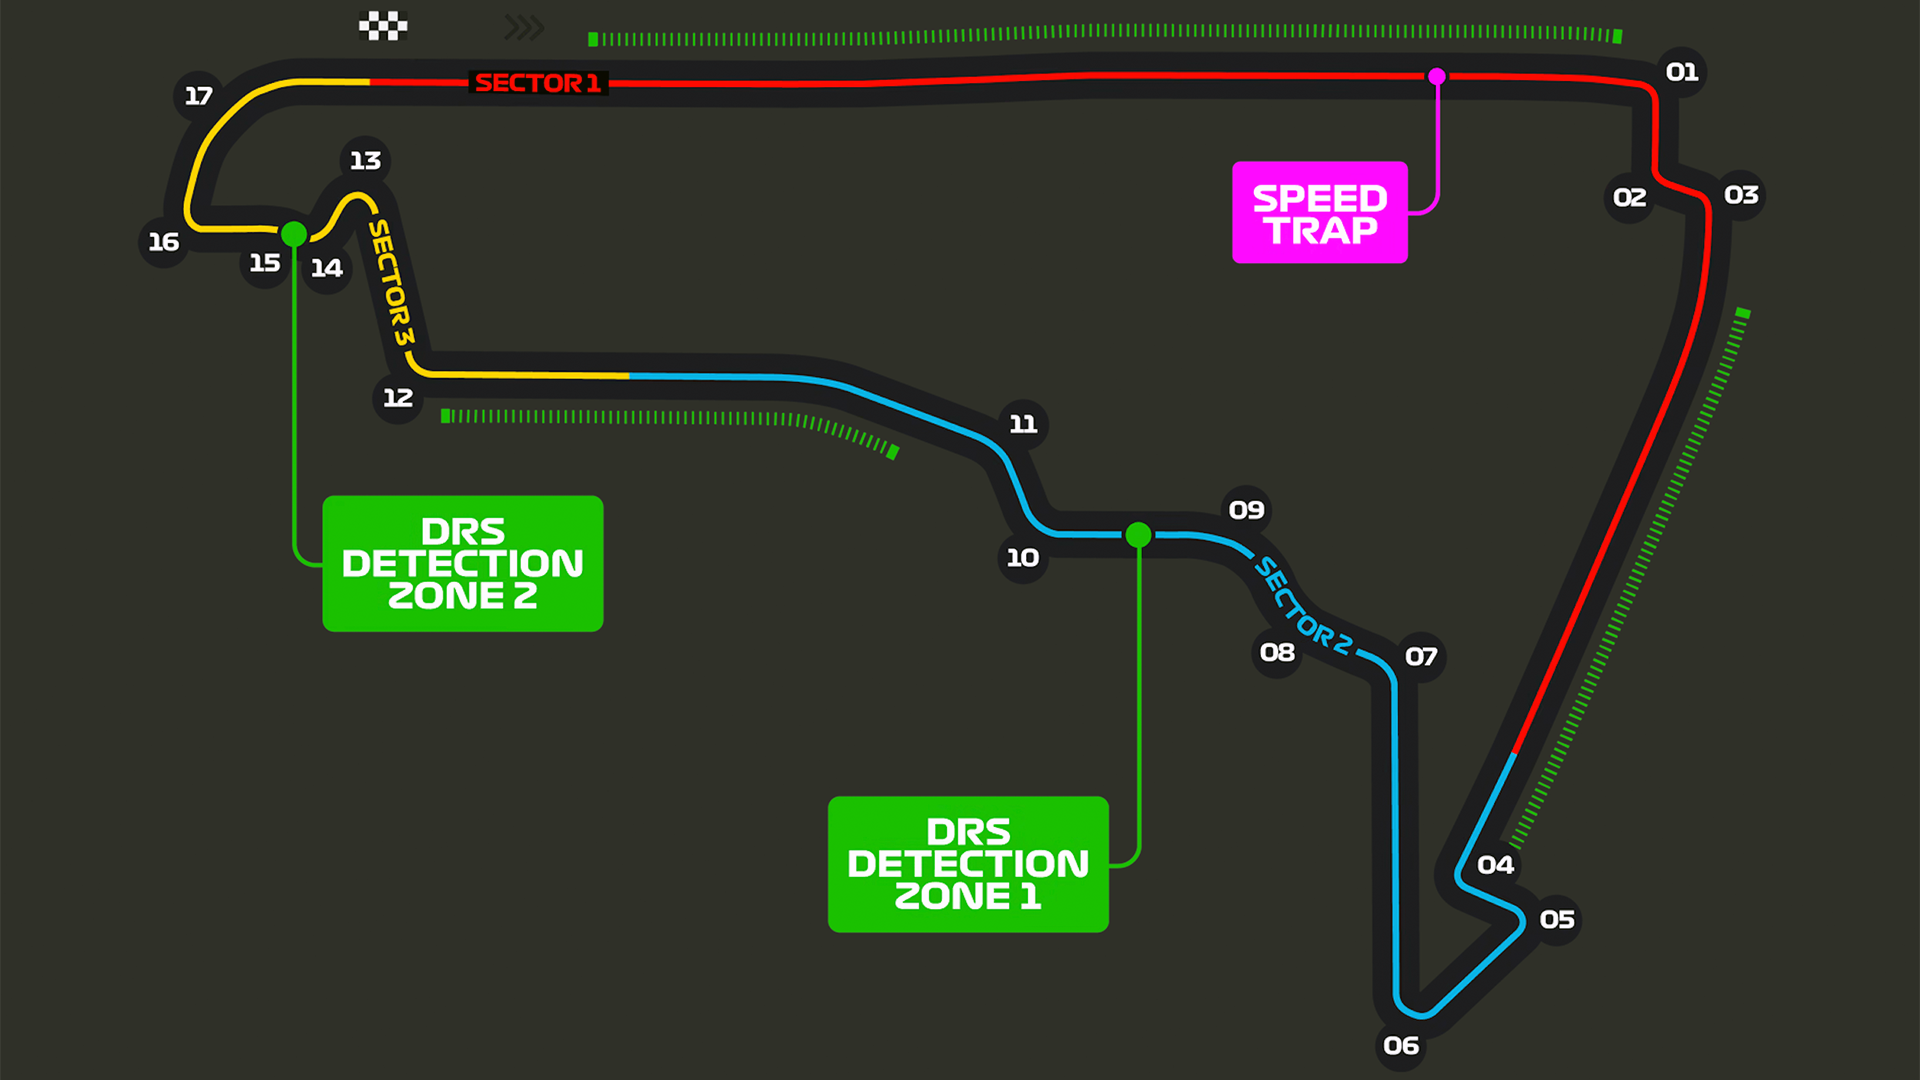 2023-F1-Mexico-GP-Track-Layout-by-AutomotiveWoman